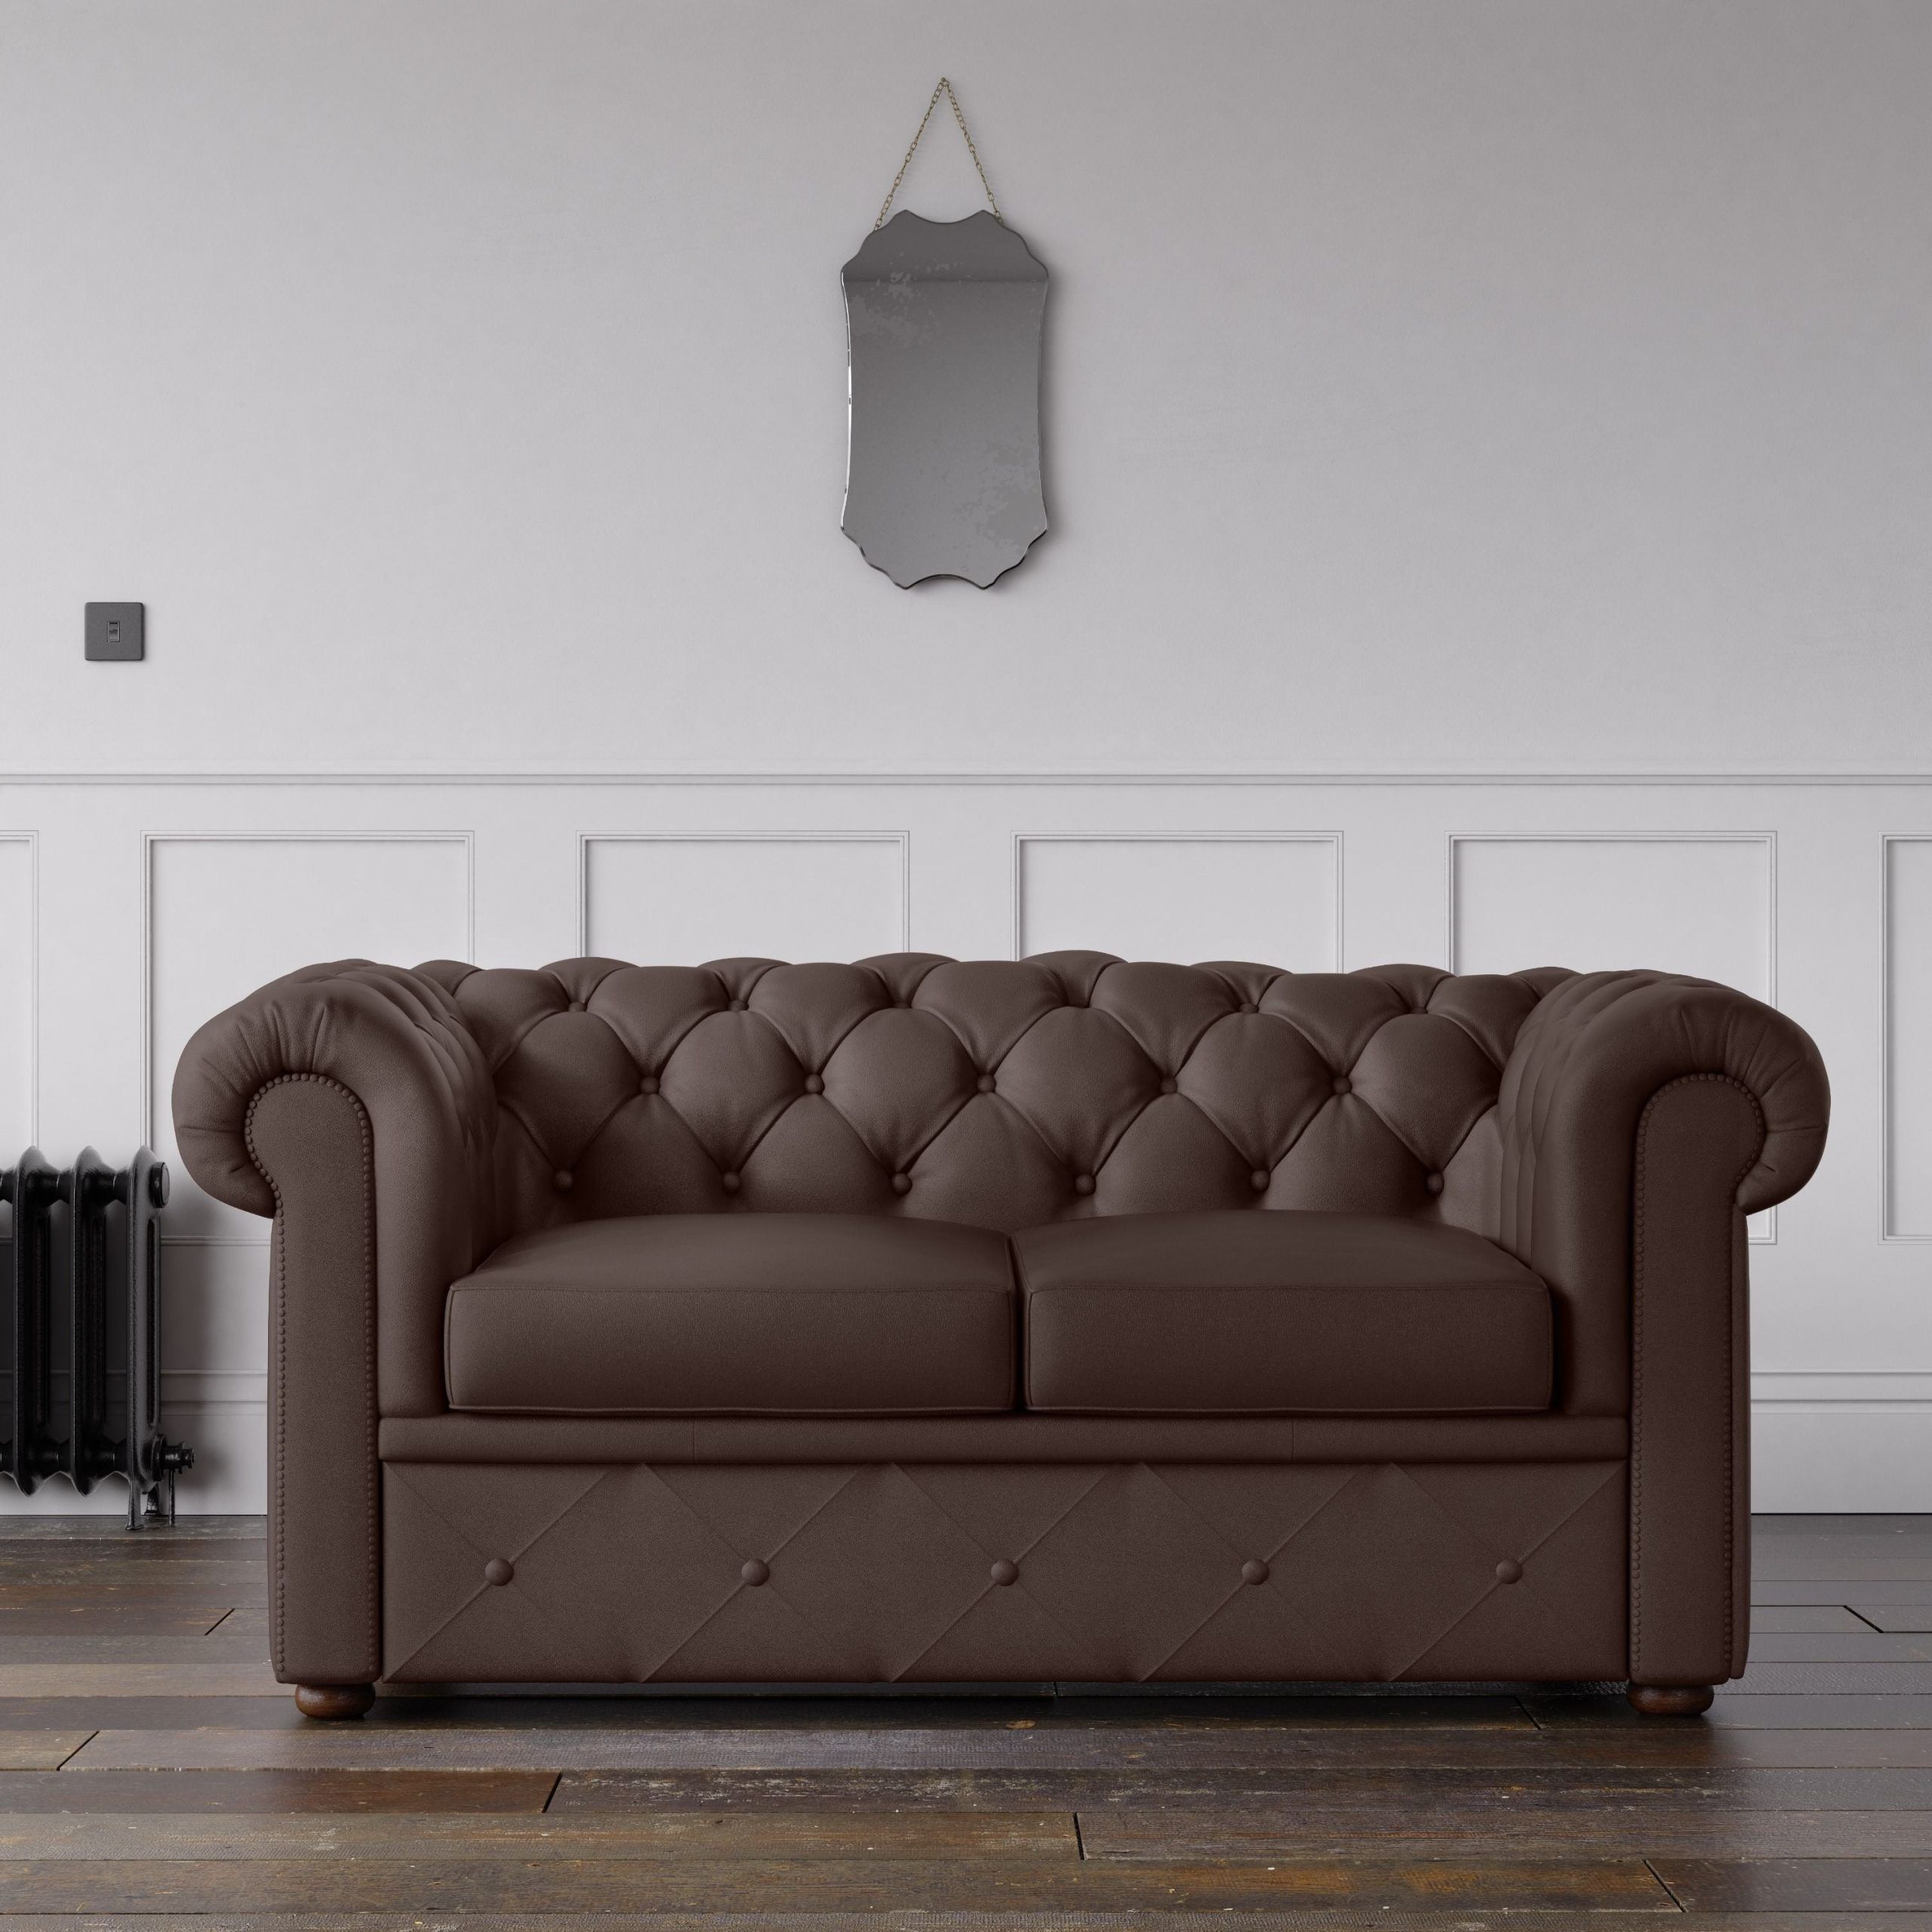 Chesterfield Faux Leather Sofa Chocolate – Endure Fabrics Within Faux Leather Sofas In Chocolate Brown (Gallery 3 of 20)